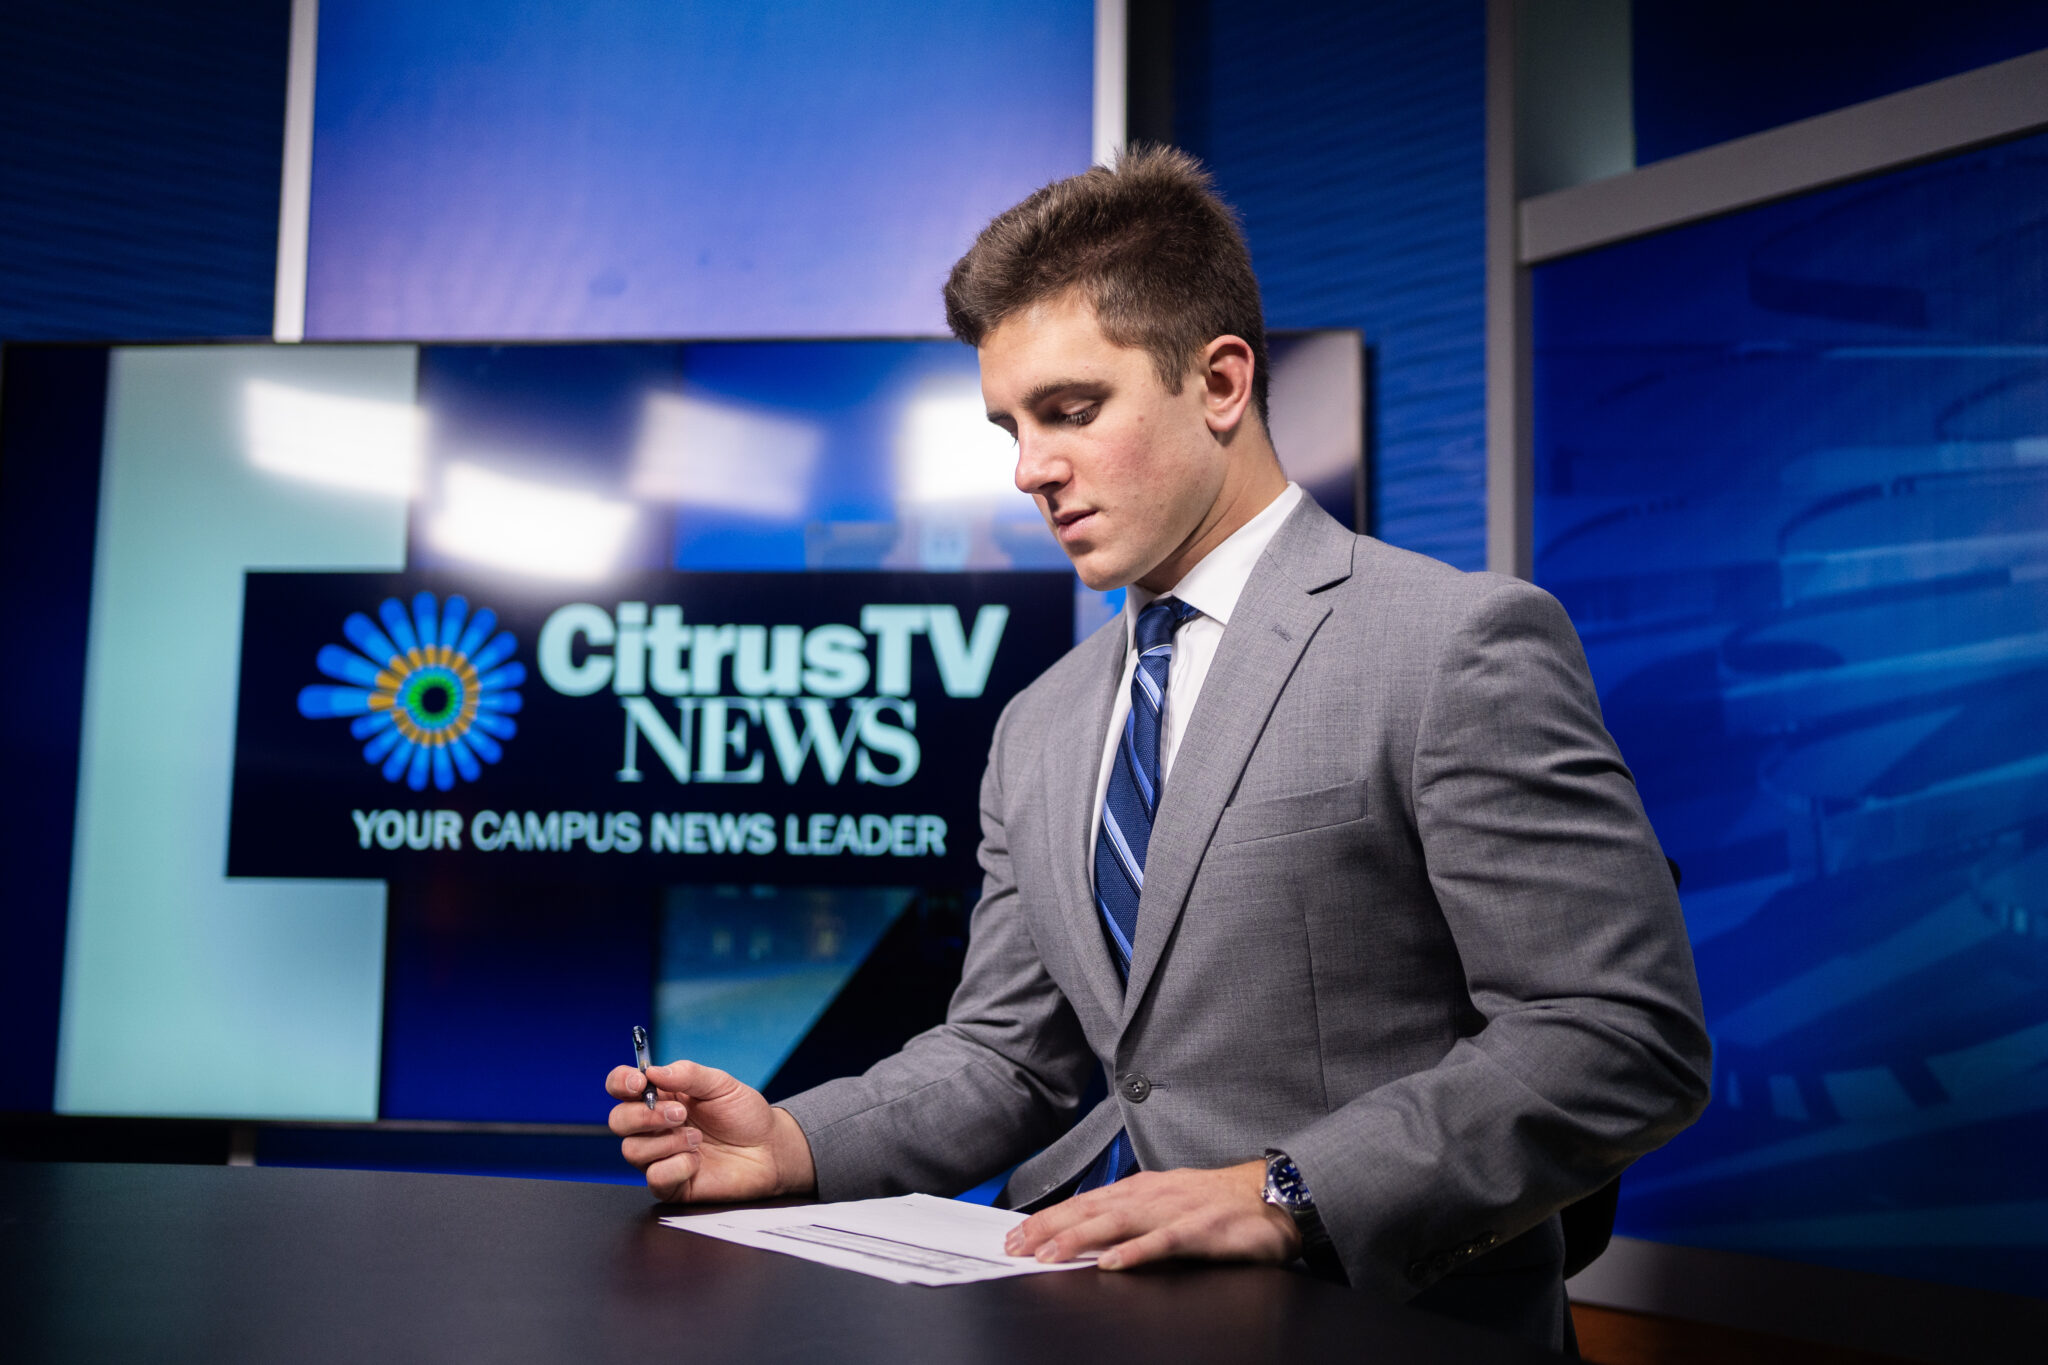 A man sits behind the anchor desk in a television studio